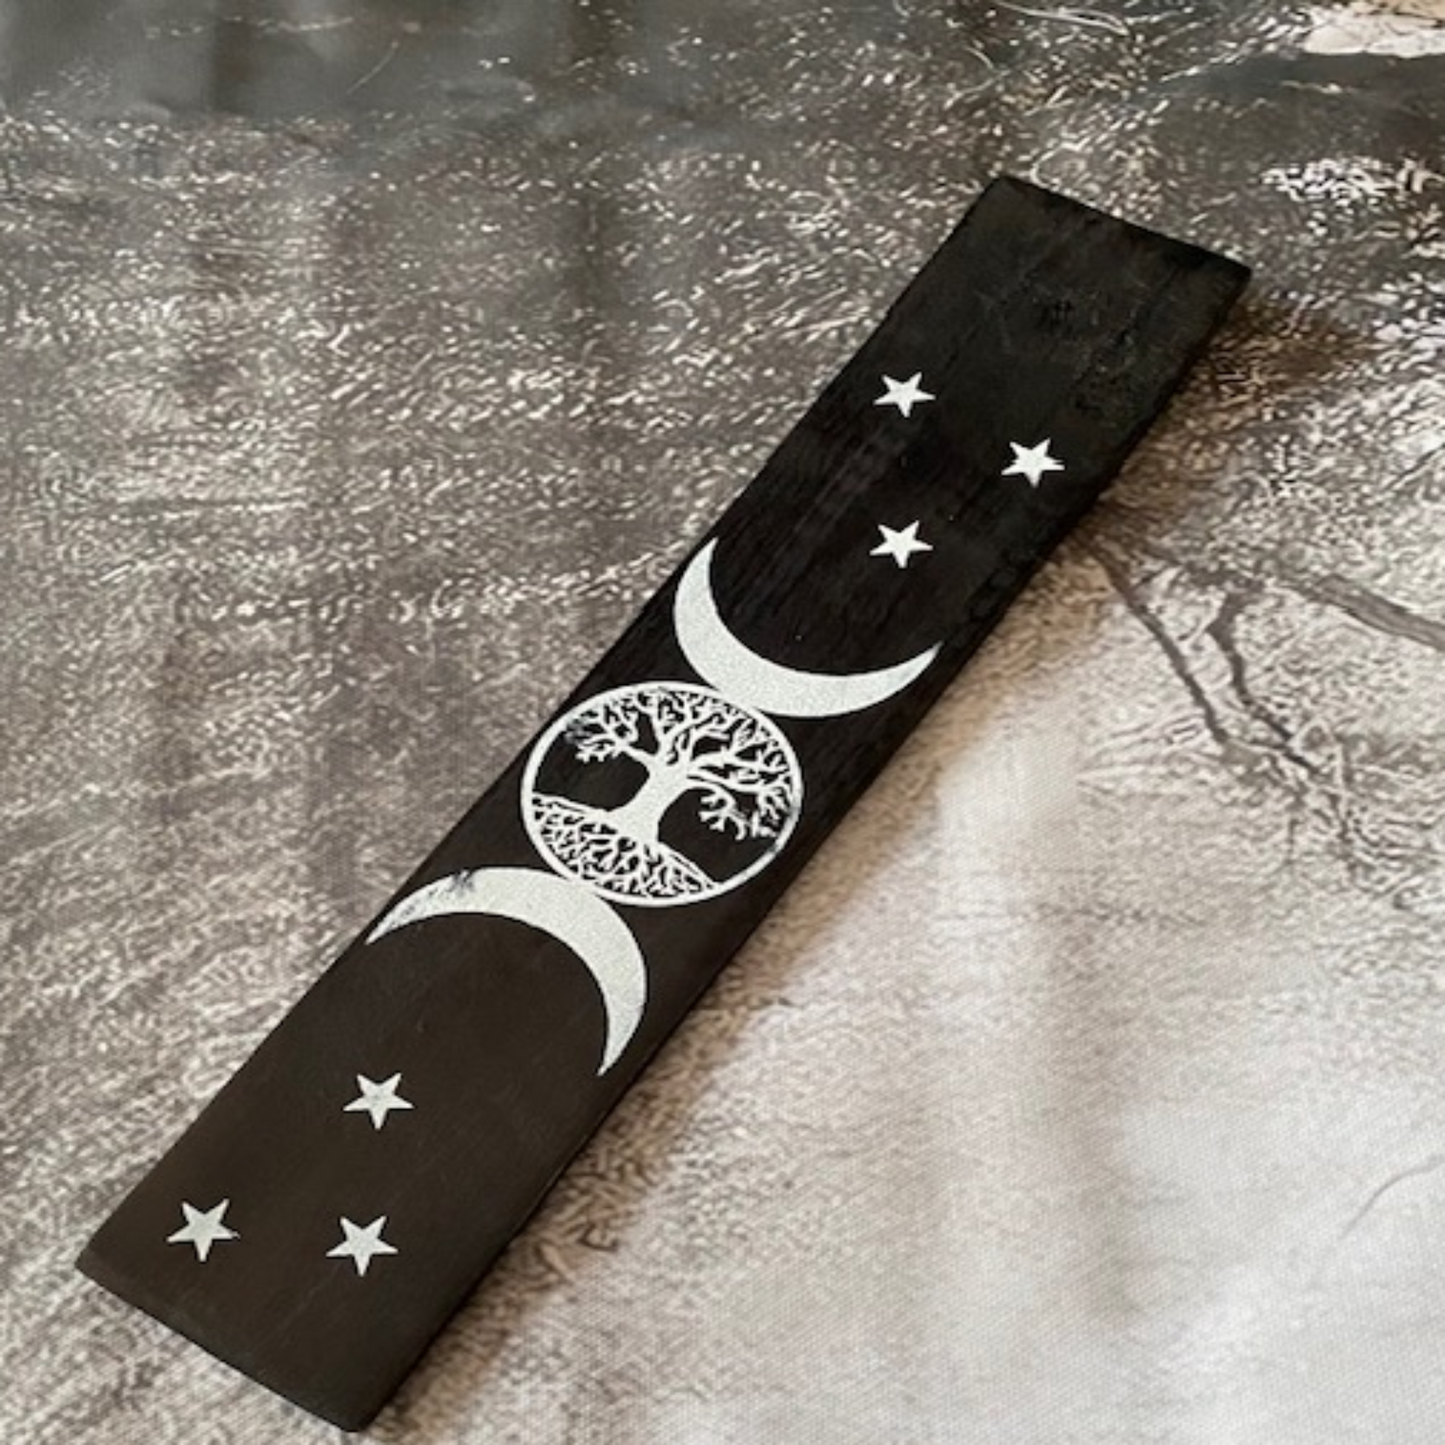 Incense Holder Black and White Tree of Life Triple Moon design